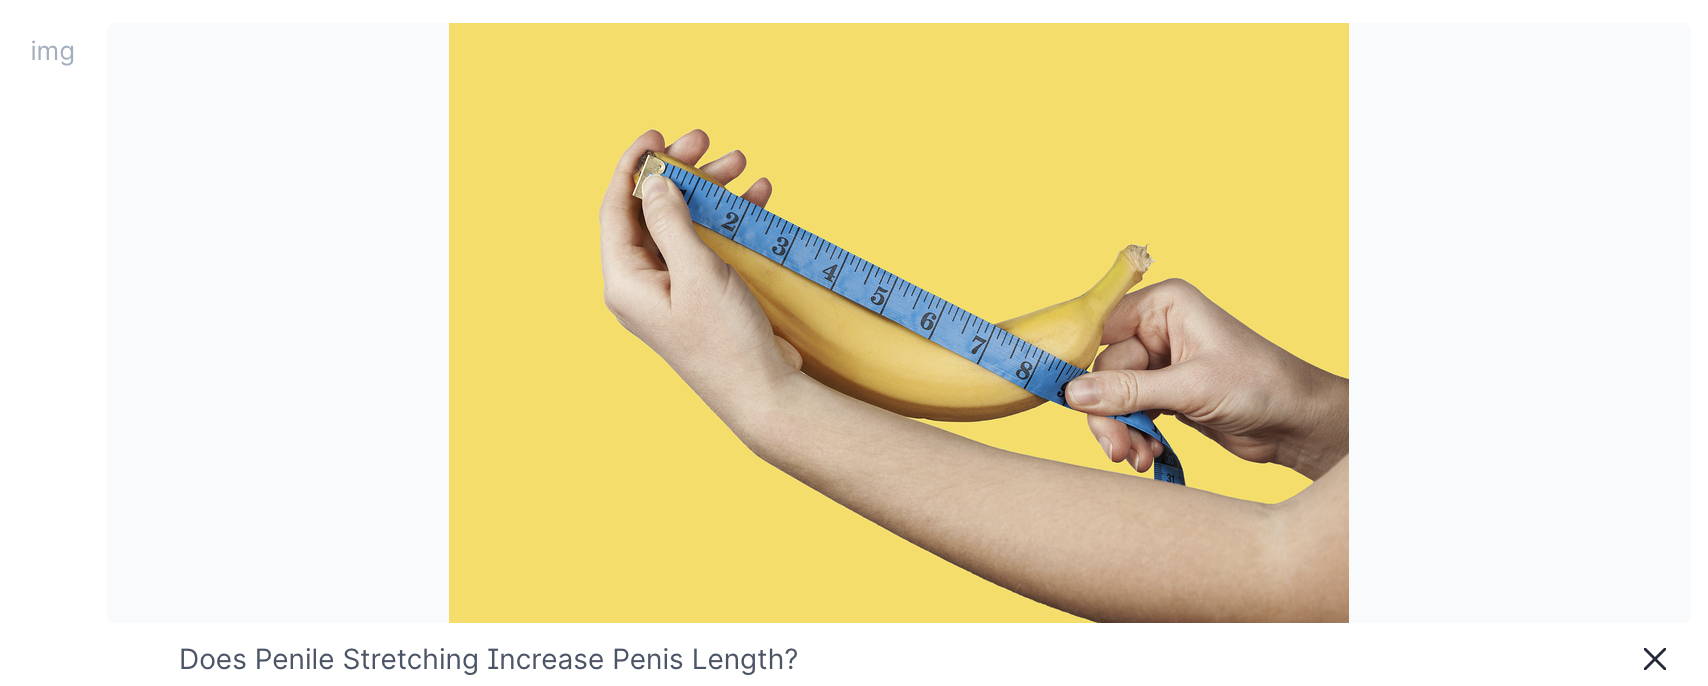 Does Penile Stretching Increase Penis Length?